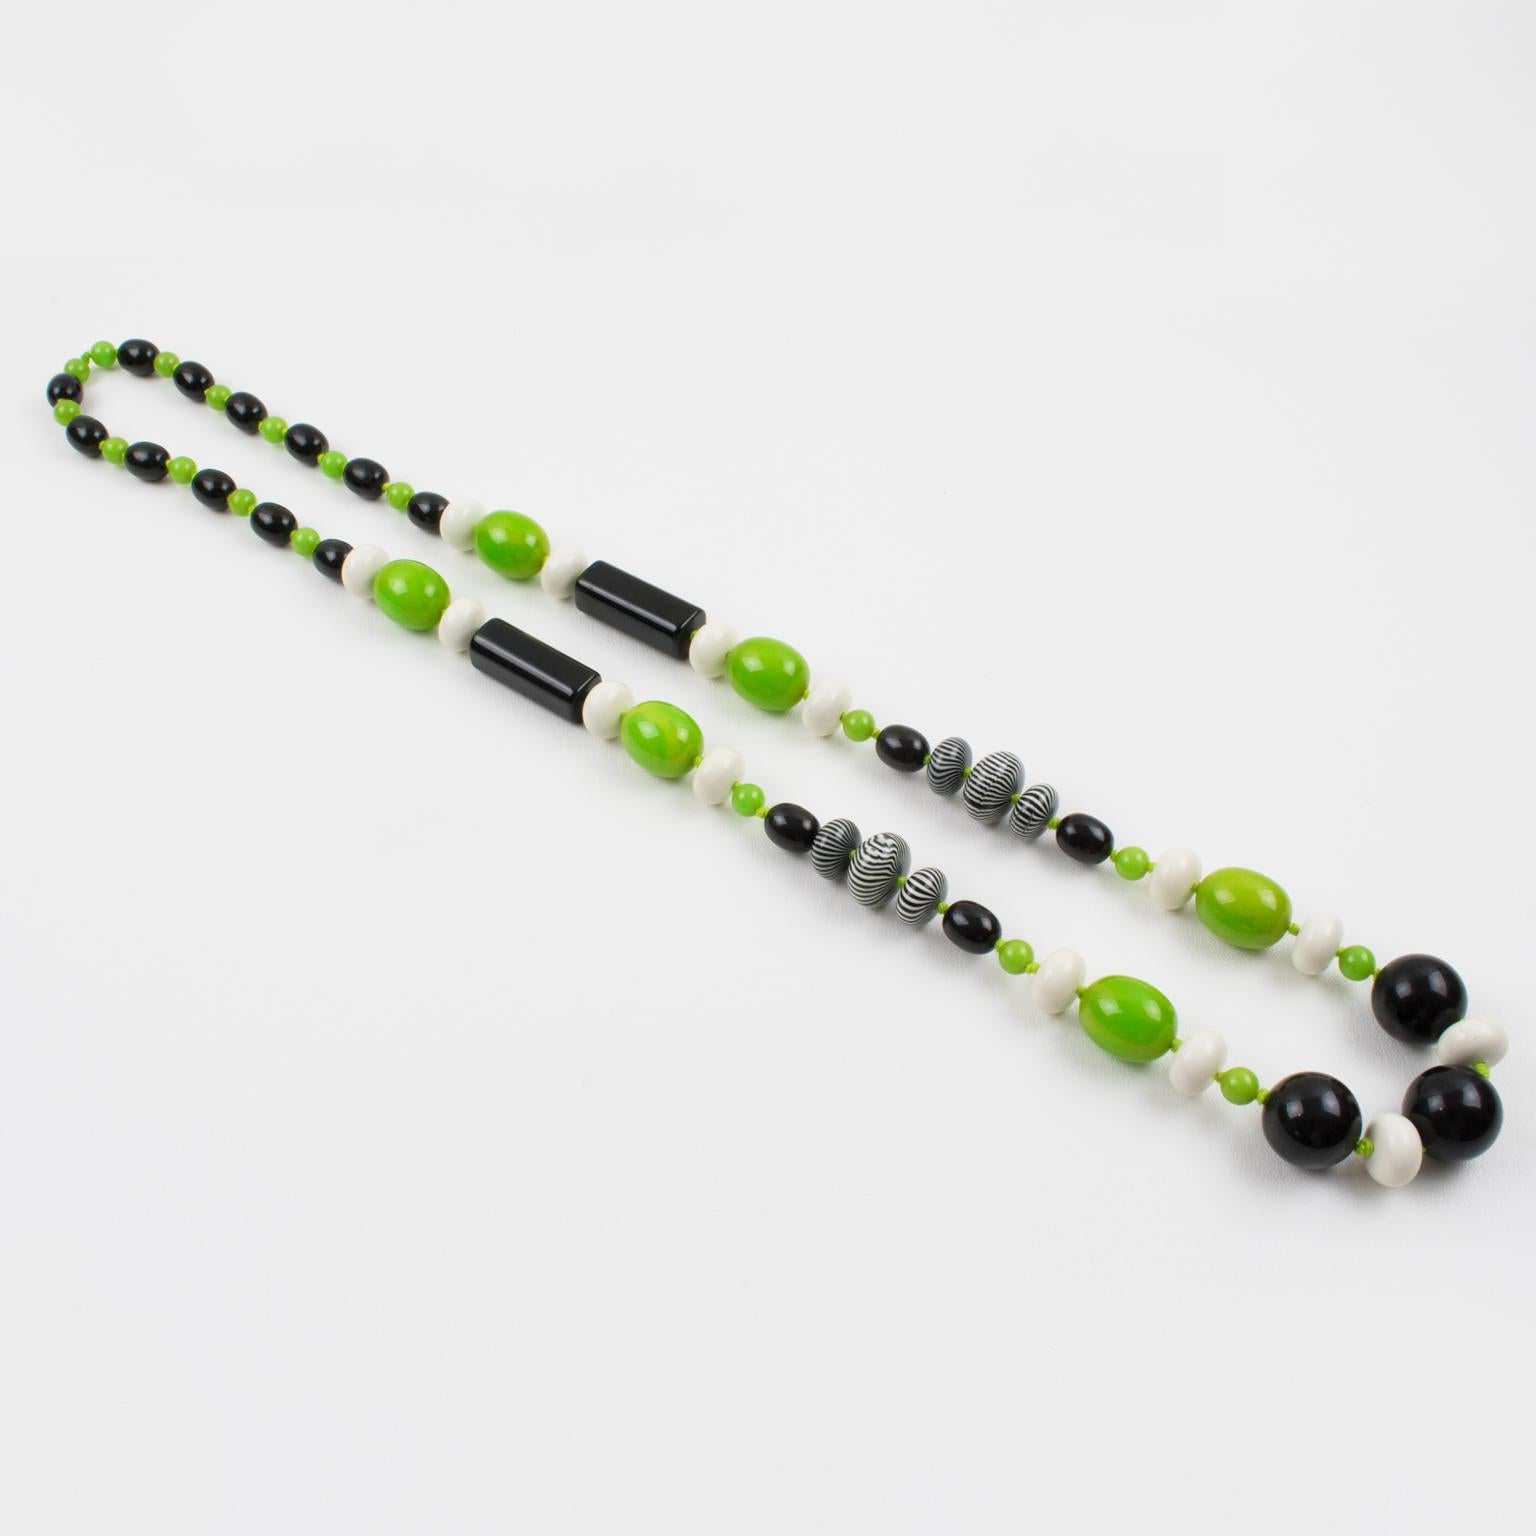 Women's or Men's Bakelite and Lucite Necklace Extra Long Shape Black, White and Apple Green Beads